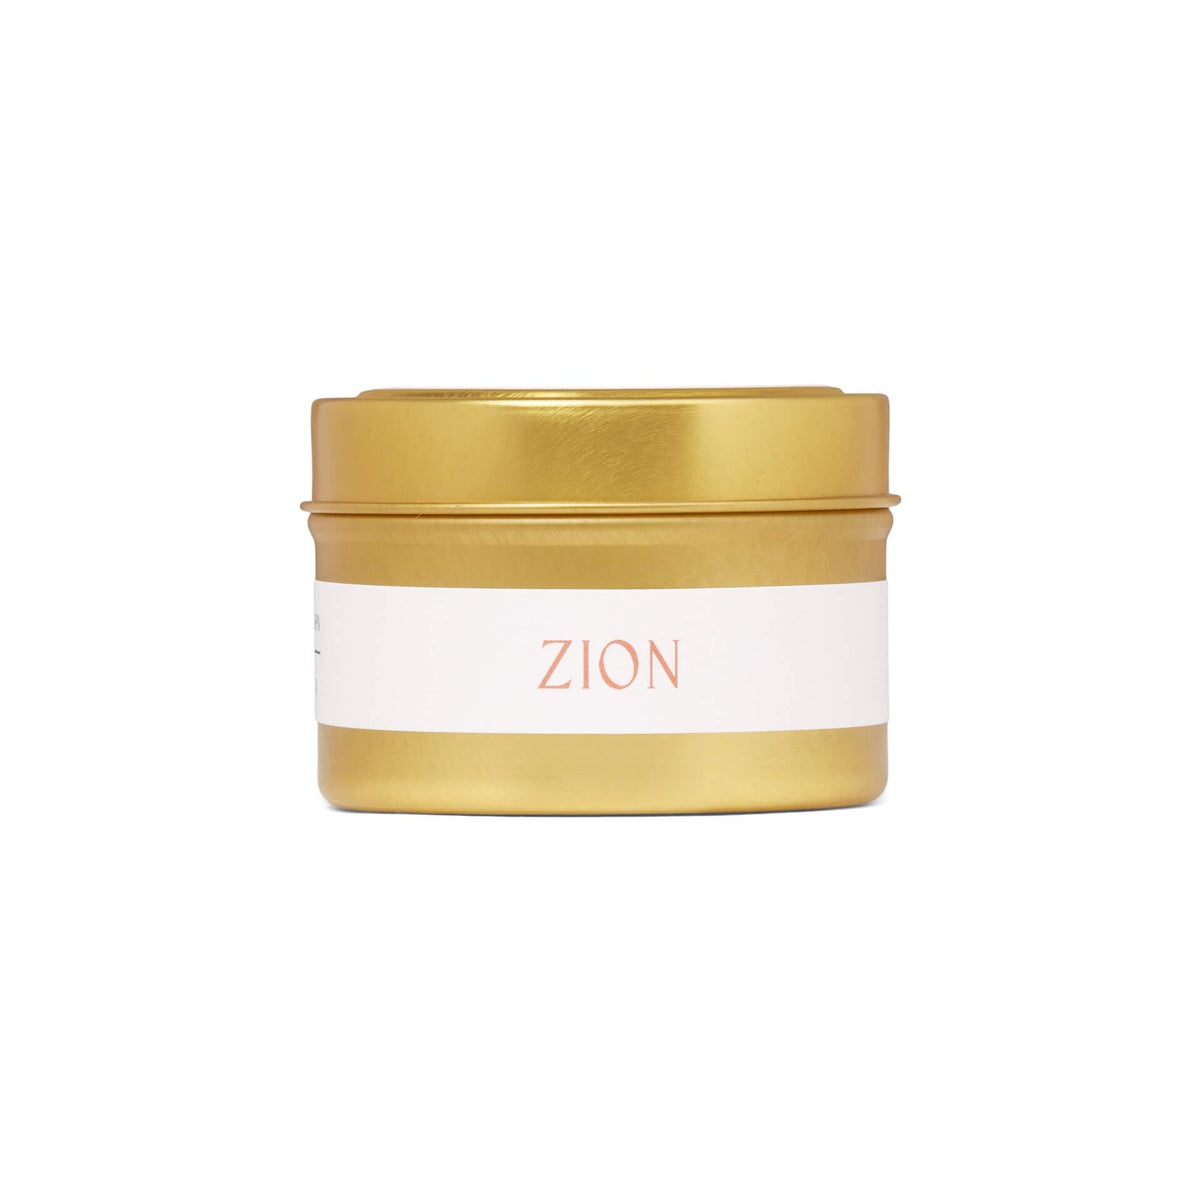 Zion Travel Candle